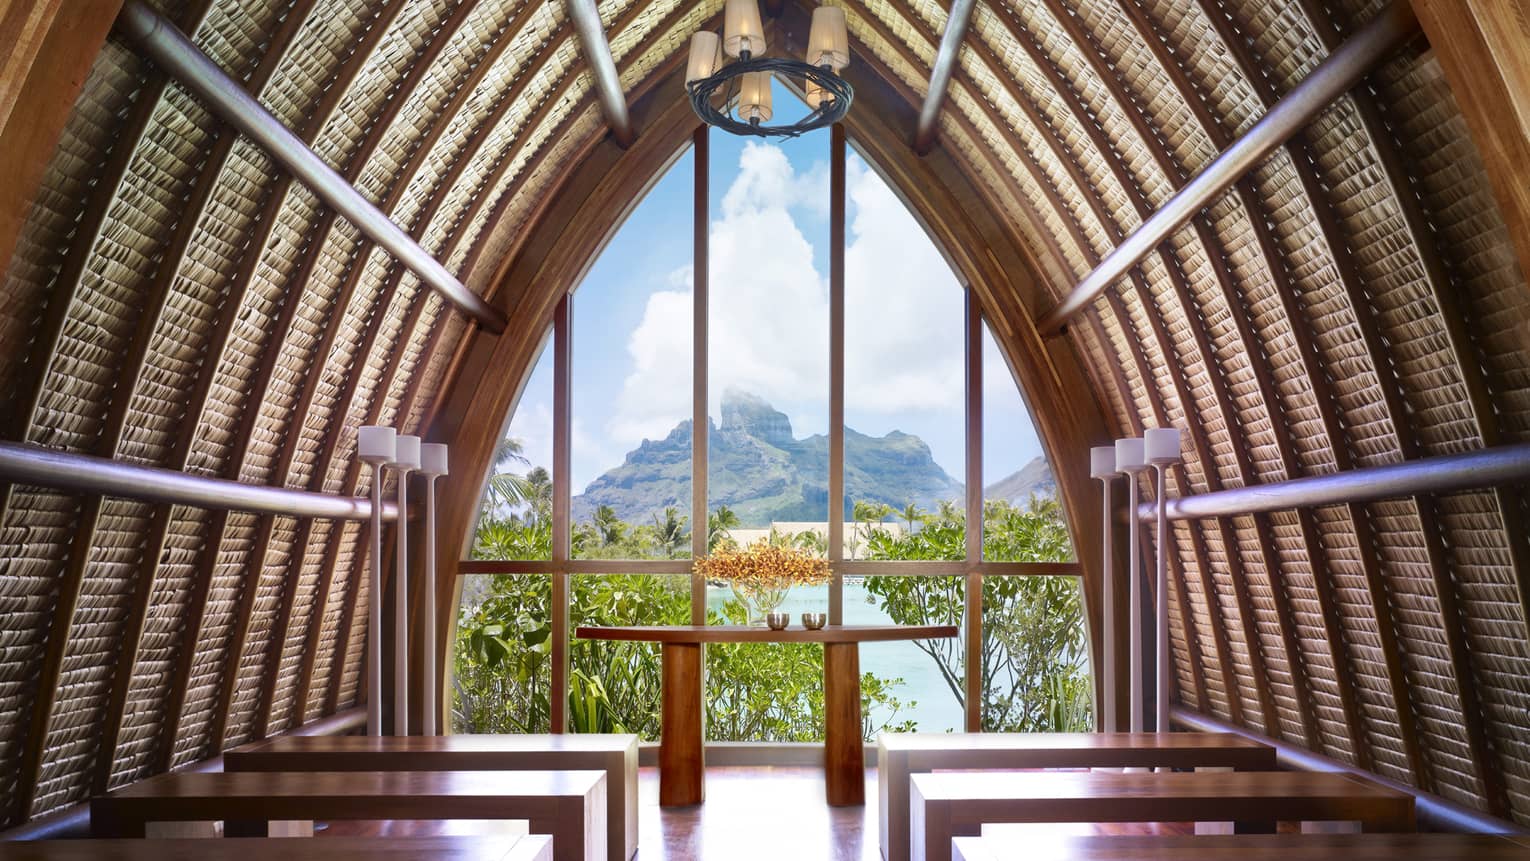 Arched roof of Aherenona chapel with end window looking over resort, lagoon and mountain